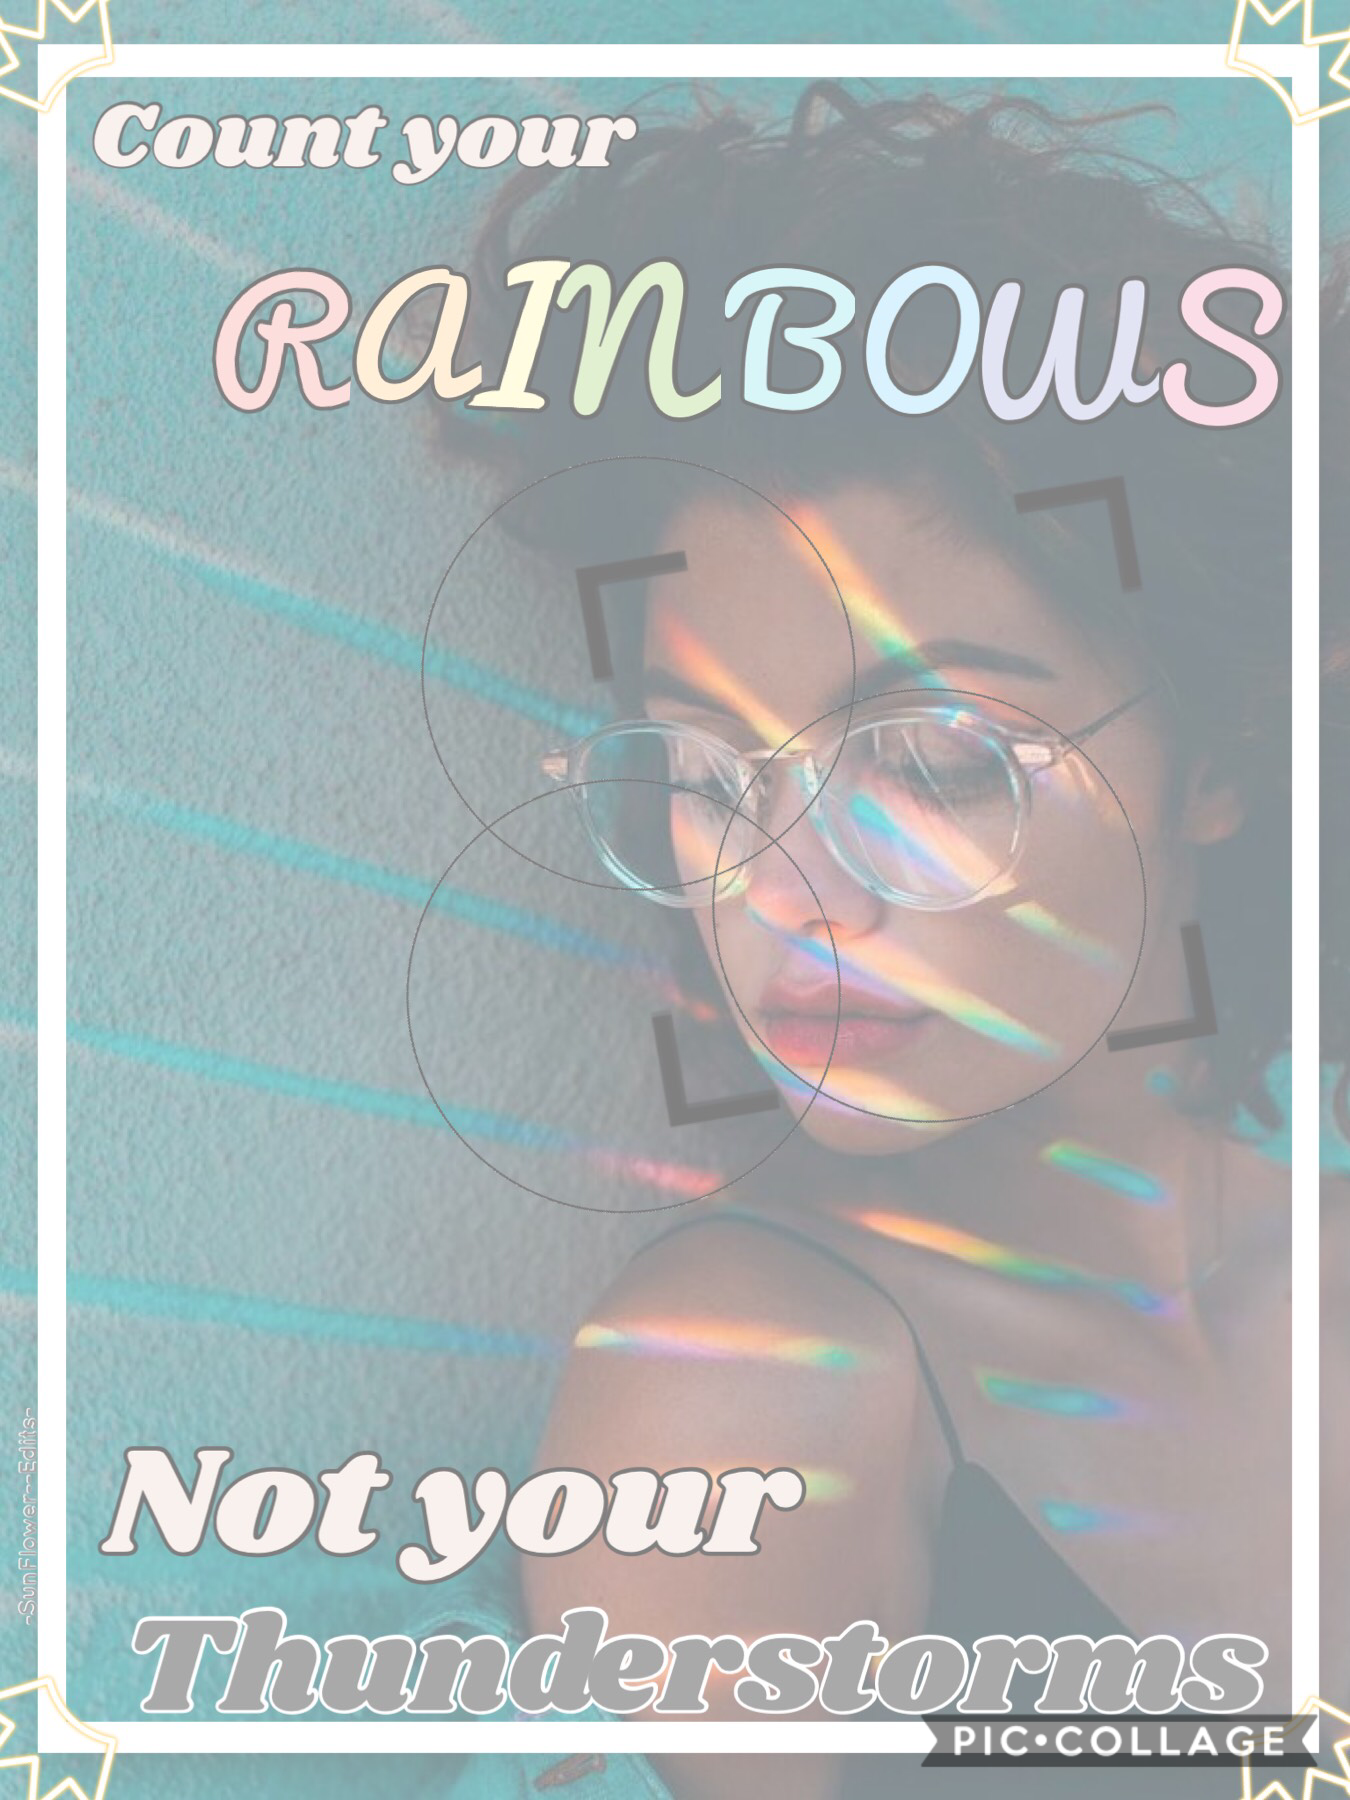 🏳️‍🌈🙃TAPPERS🙃🏳️‍🌈

This is another rainbow edit I made last night🙃🙃 i like this one more than the others but I dunno 🤷‍♀️😂 MoRe Rainbow Edits coming!